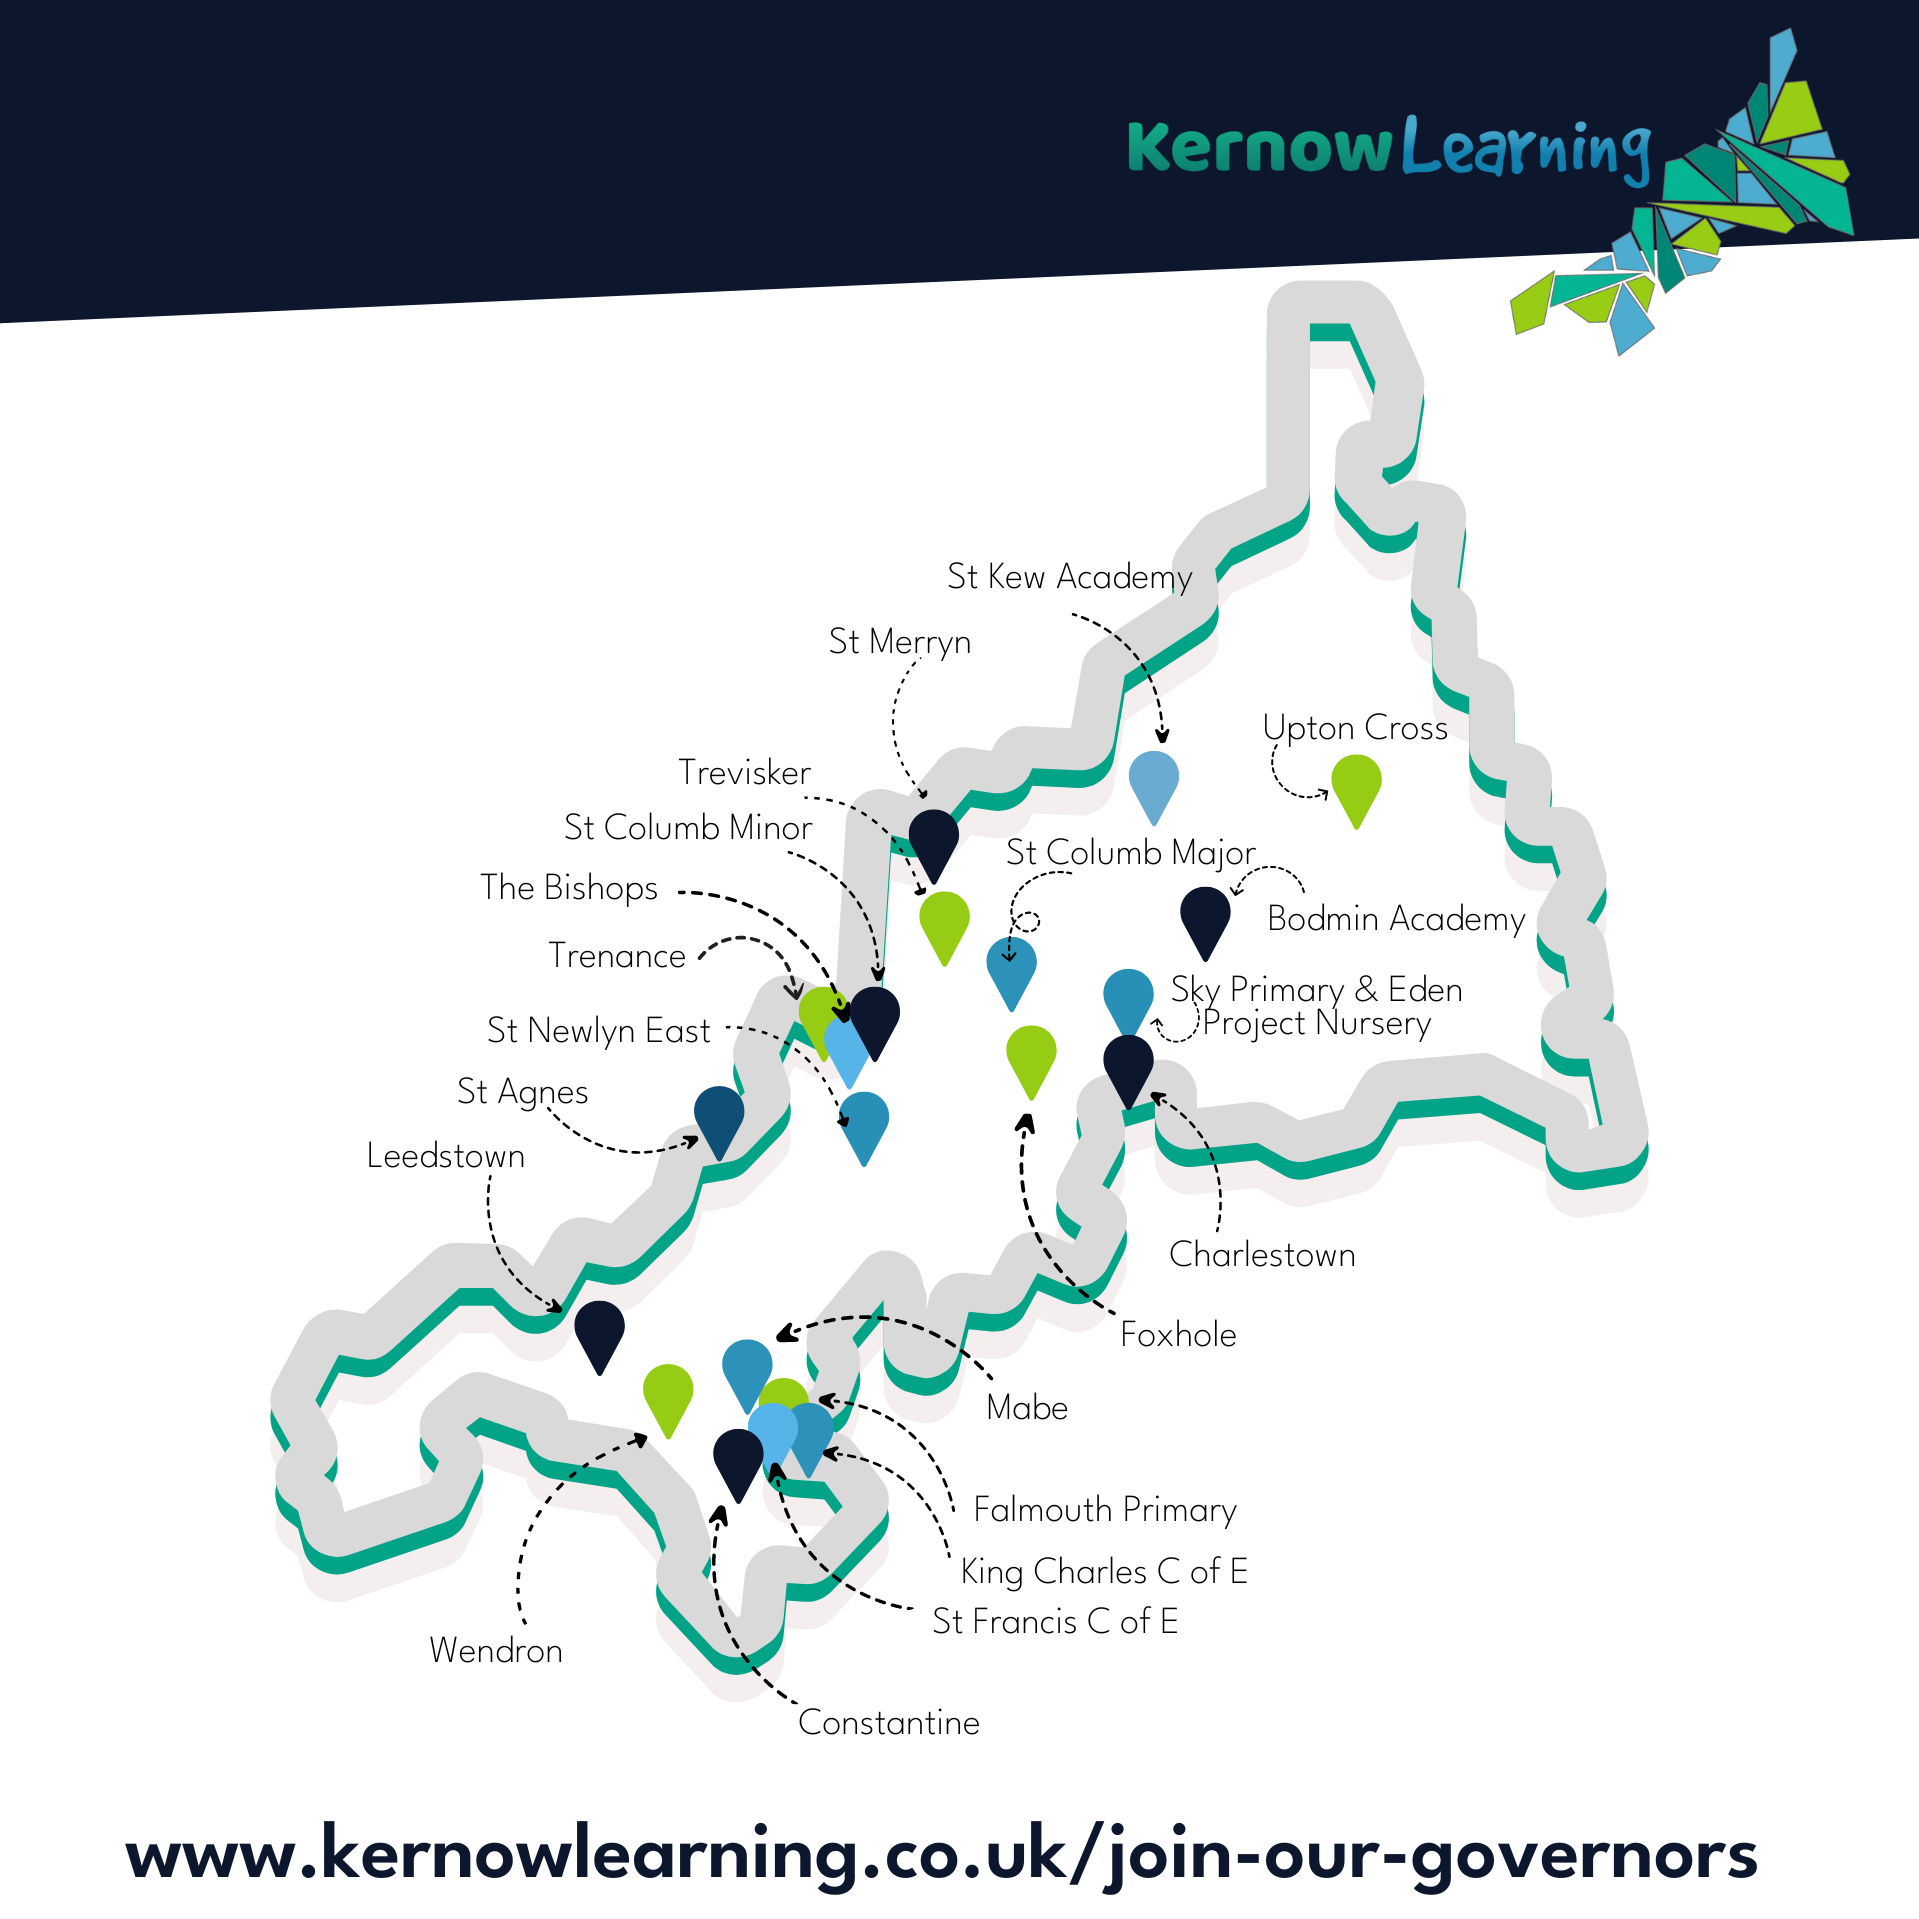 A map of the Cornish peninsular showing the location of the 21 schools in Kernow Learning.